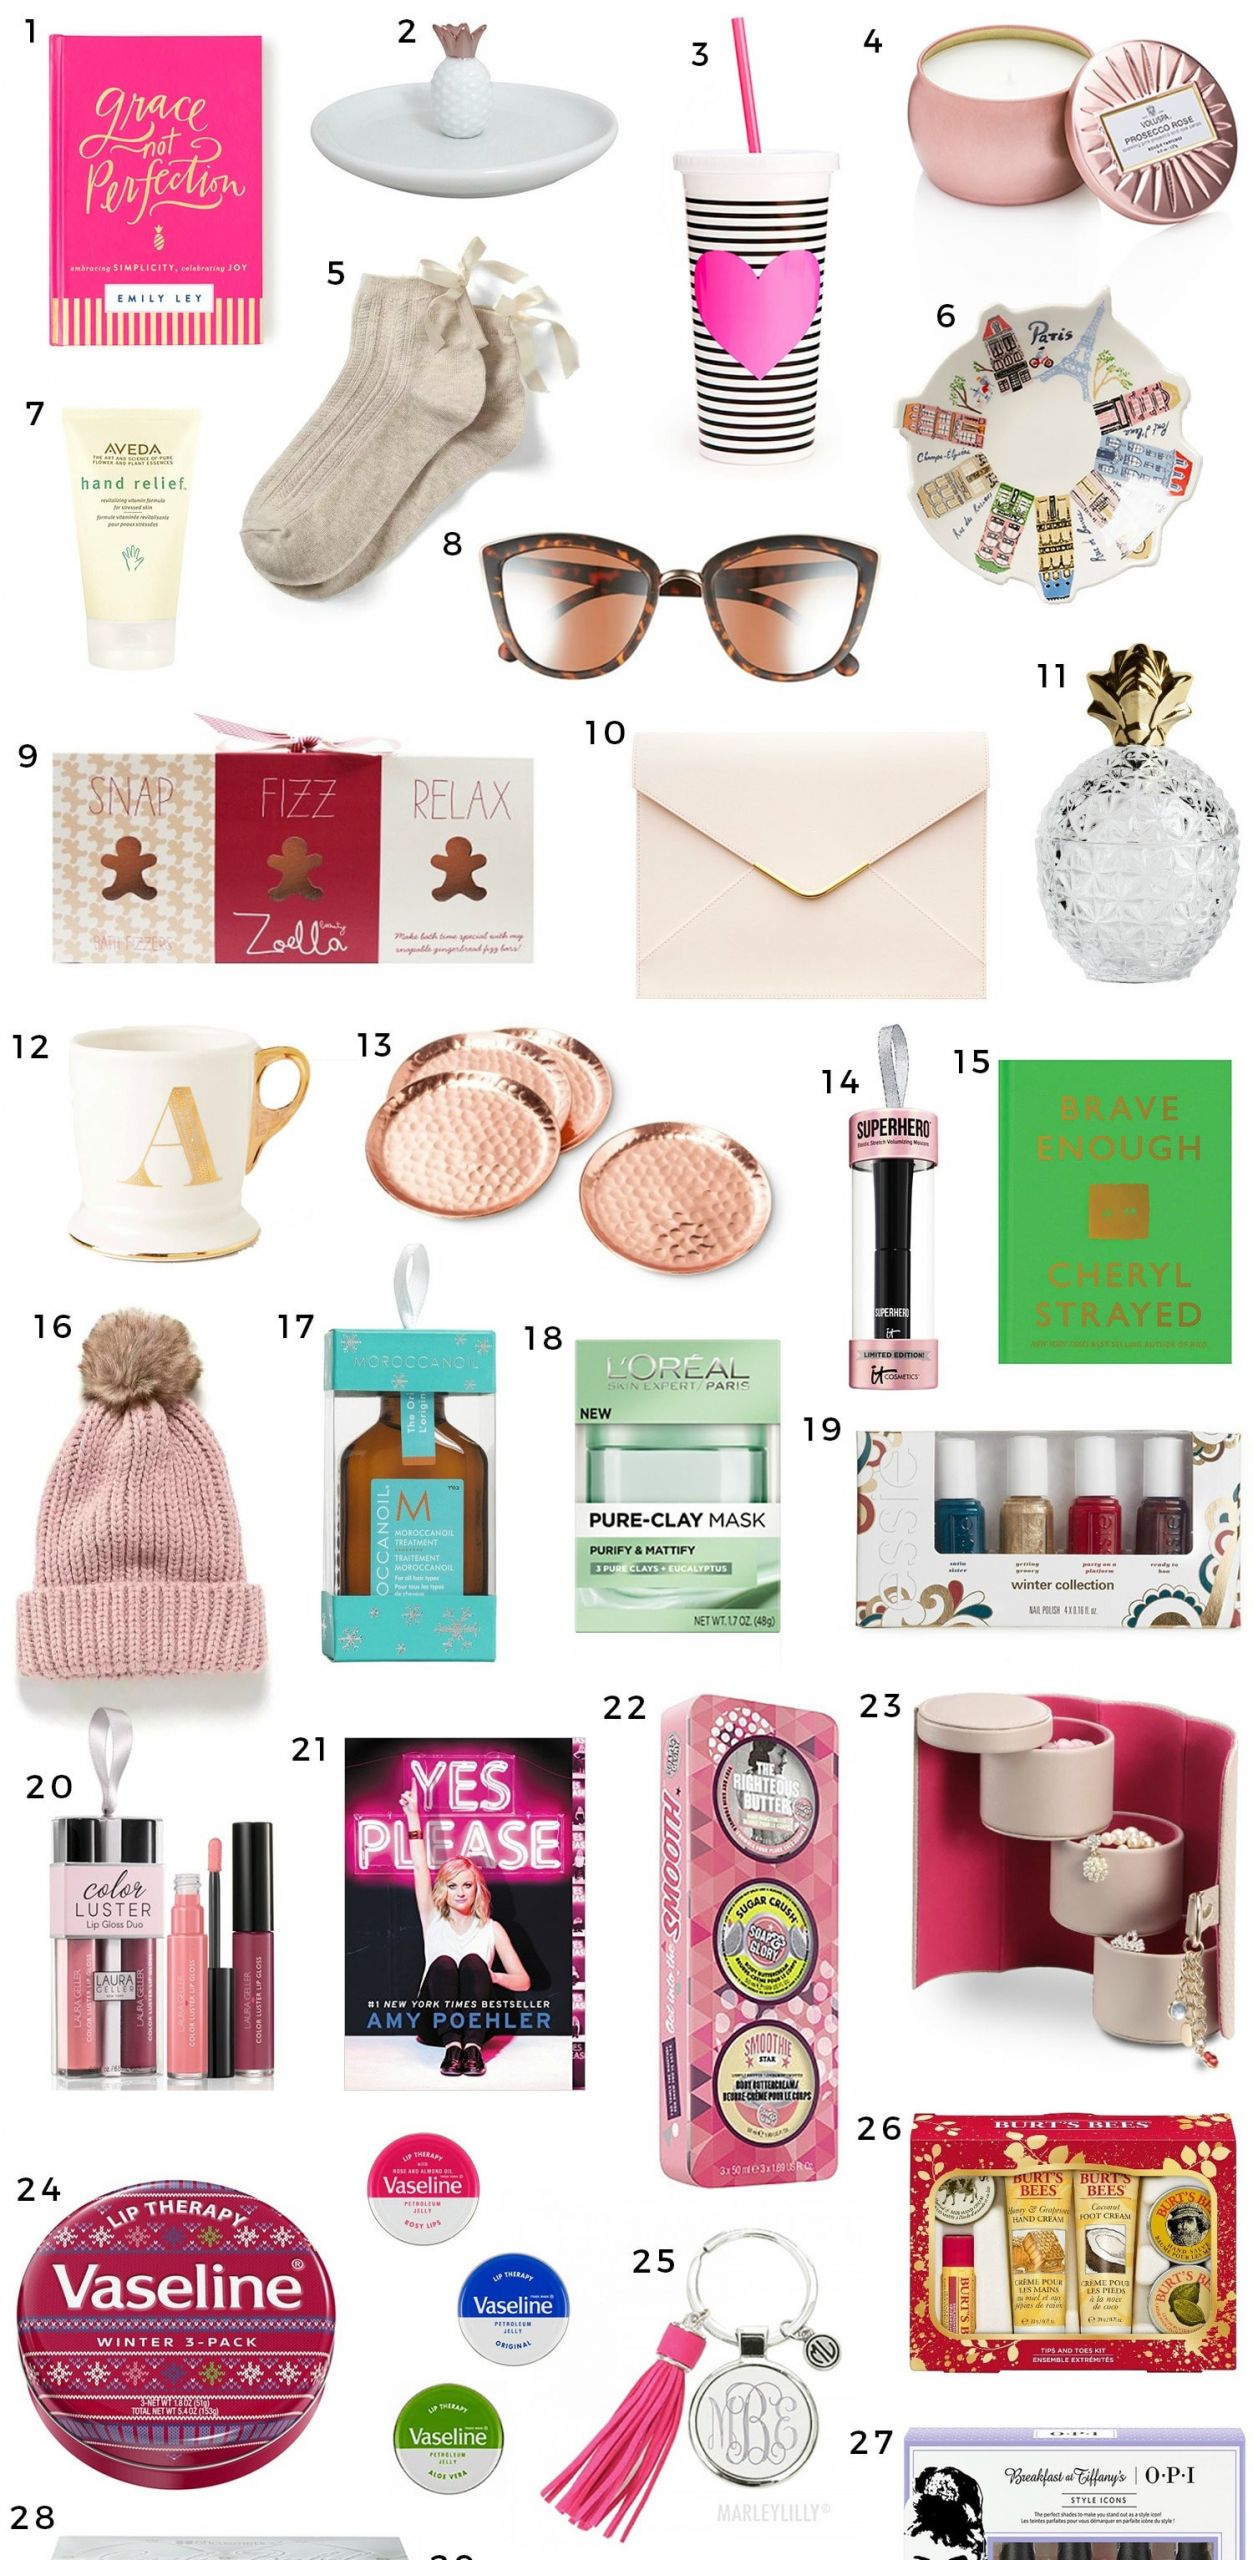 Great Christmas Gifts For Women
 The Best Christmas Gift Ideas for Women Under $15